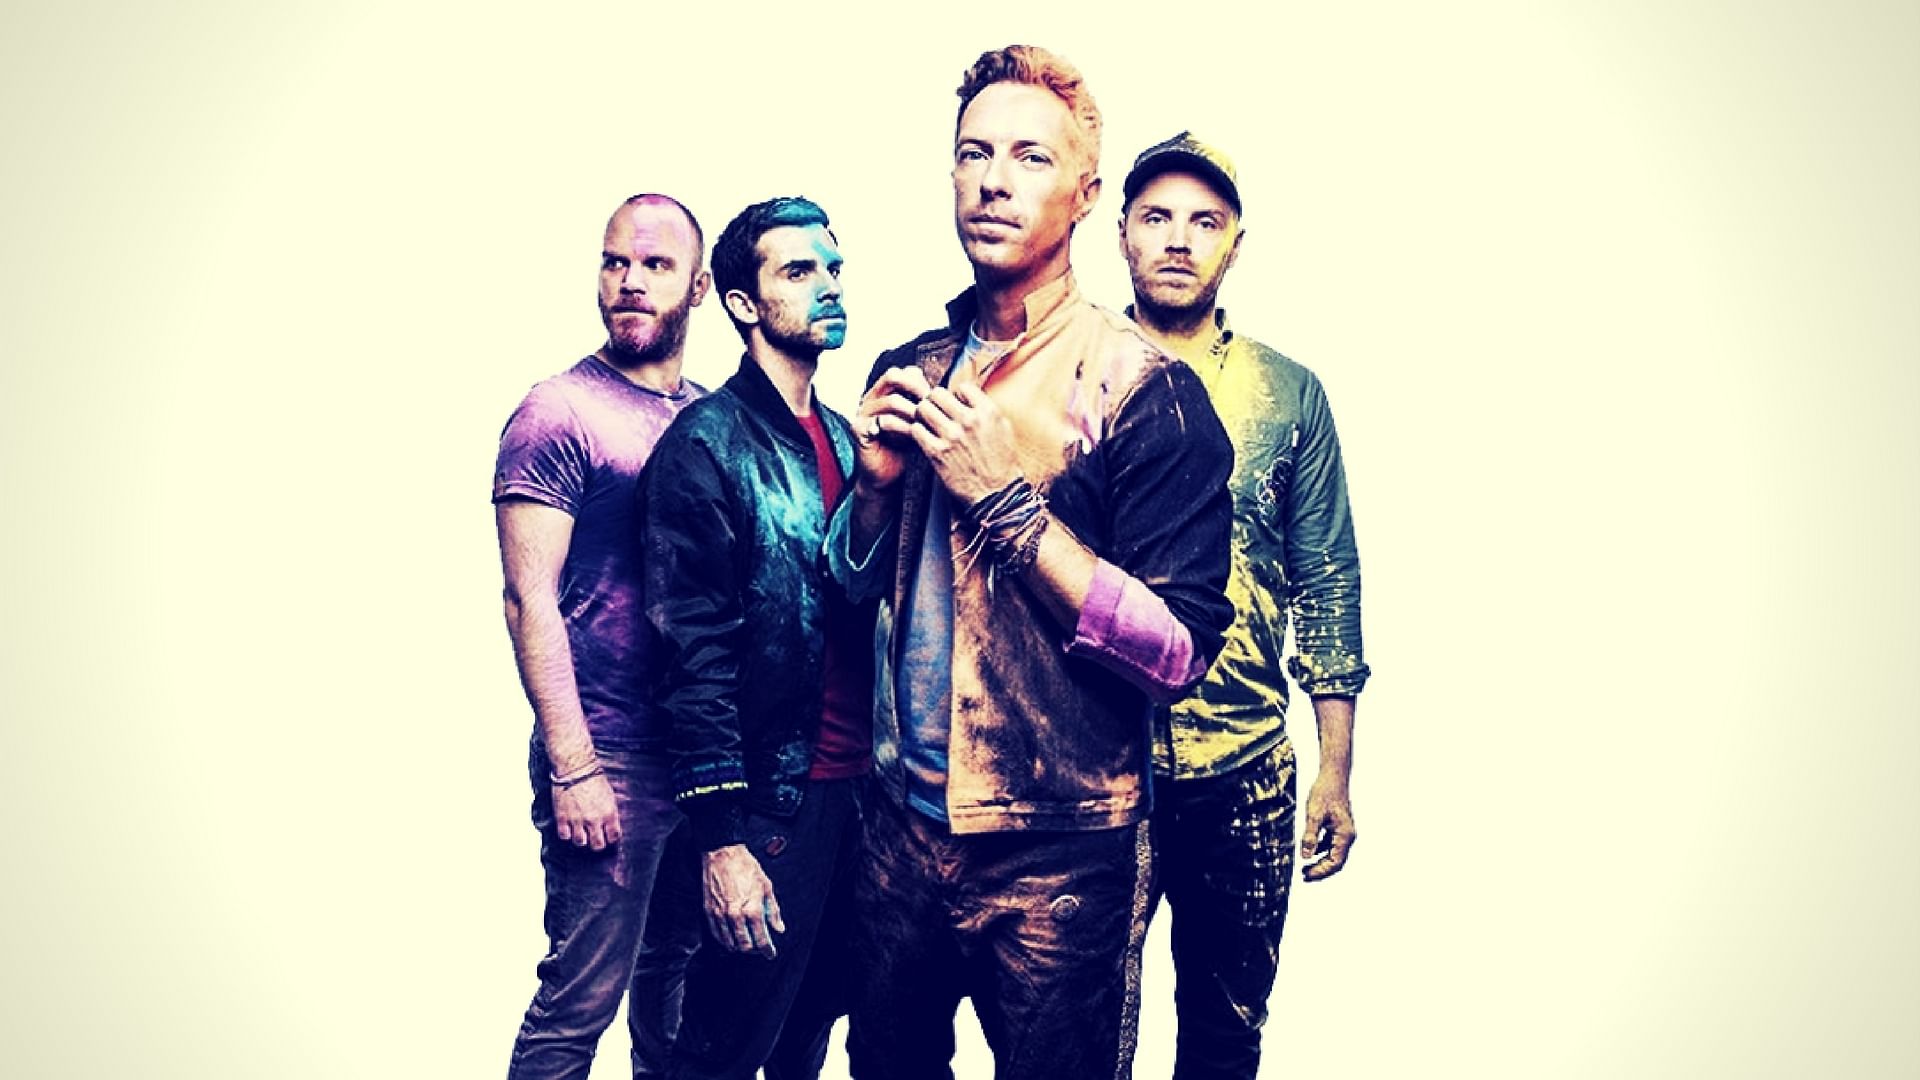 <i>Coldplay</i> is finally going to perform in India. (Photo courtesy: Twitter/<a href="https://twitter.com/FFwdTrends">@FFwdTrends</a>)